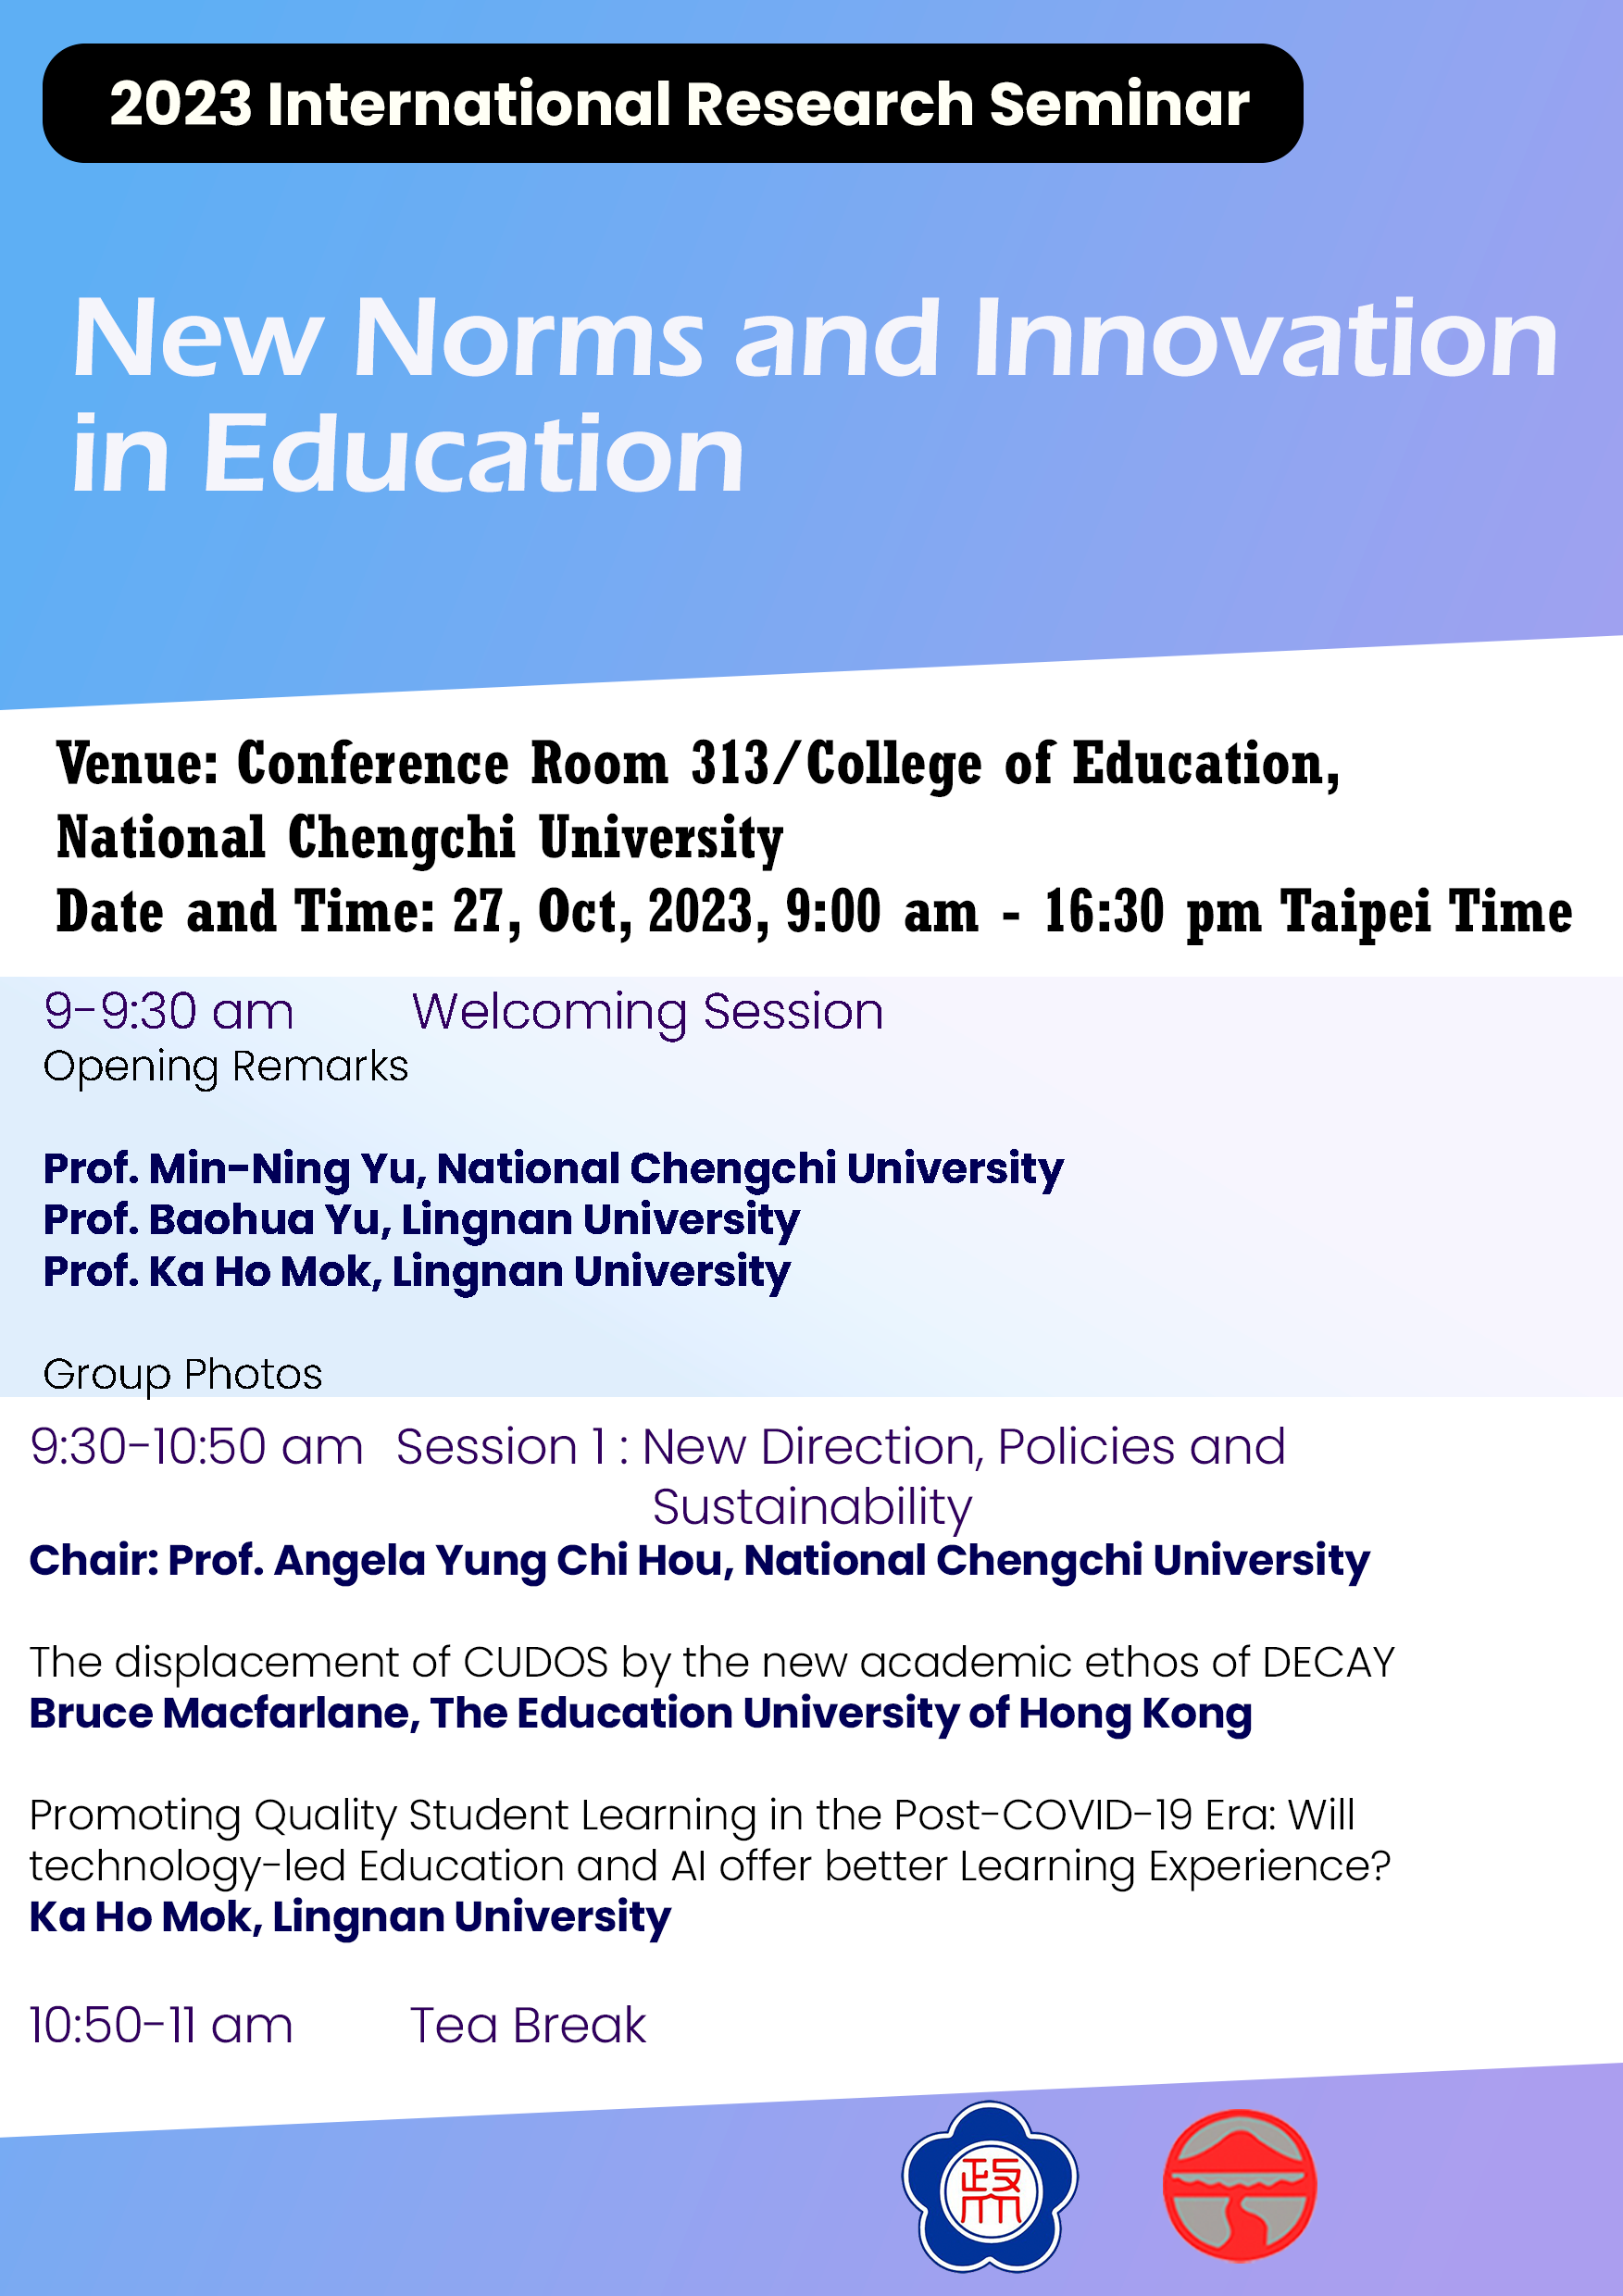 NCCU-LU Joint Symposium: New Norms and Innovation in Education